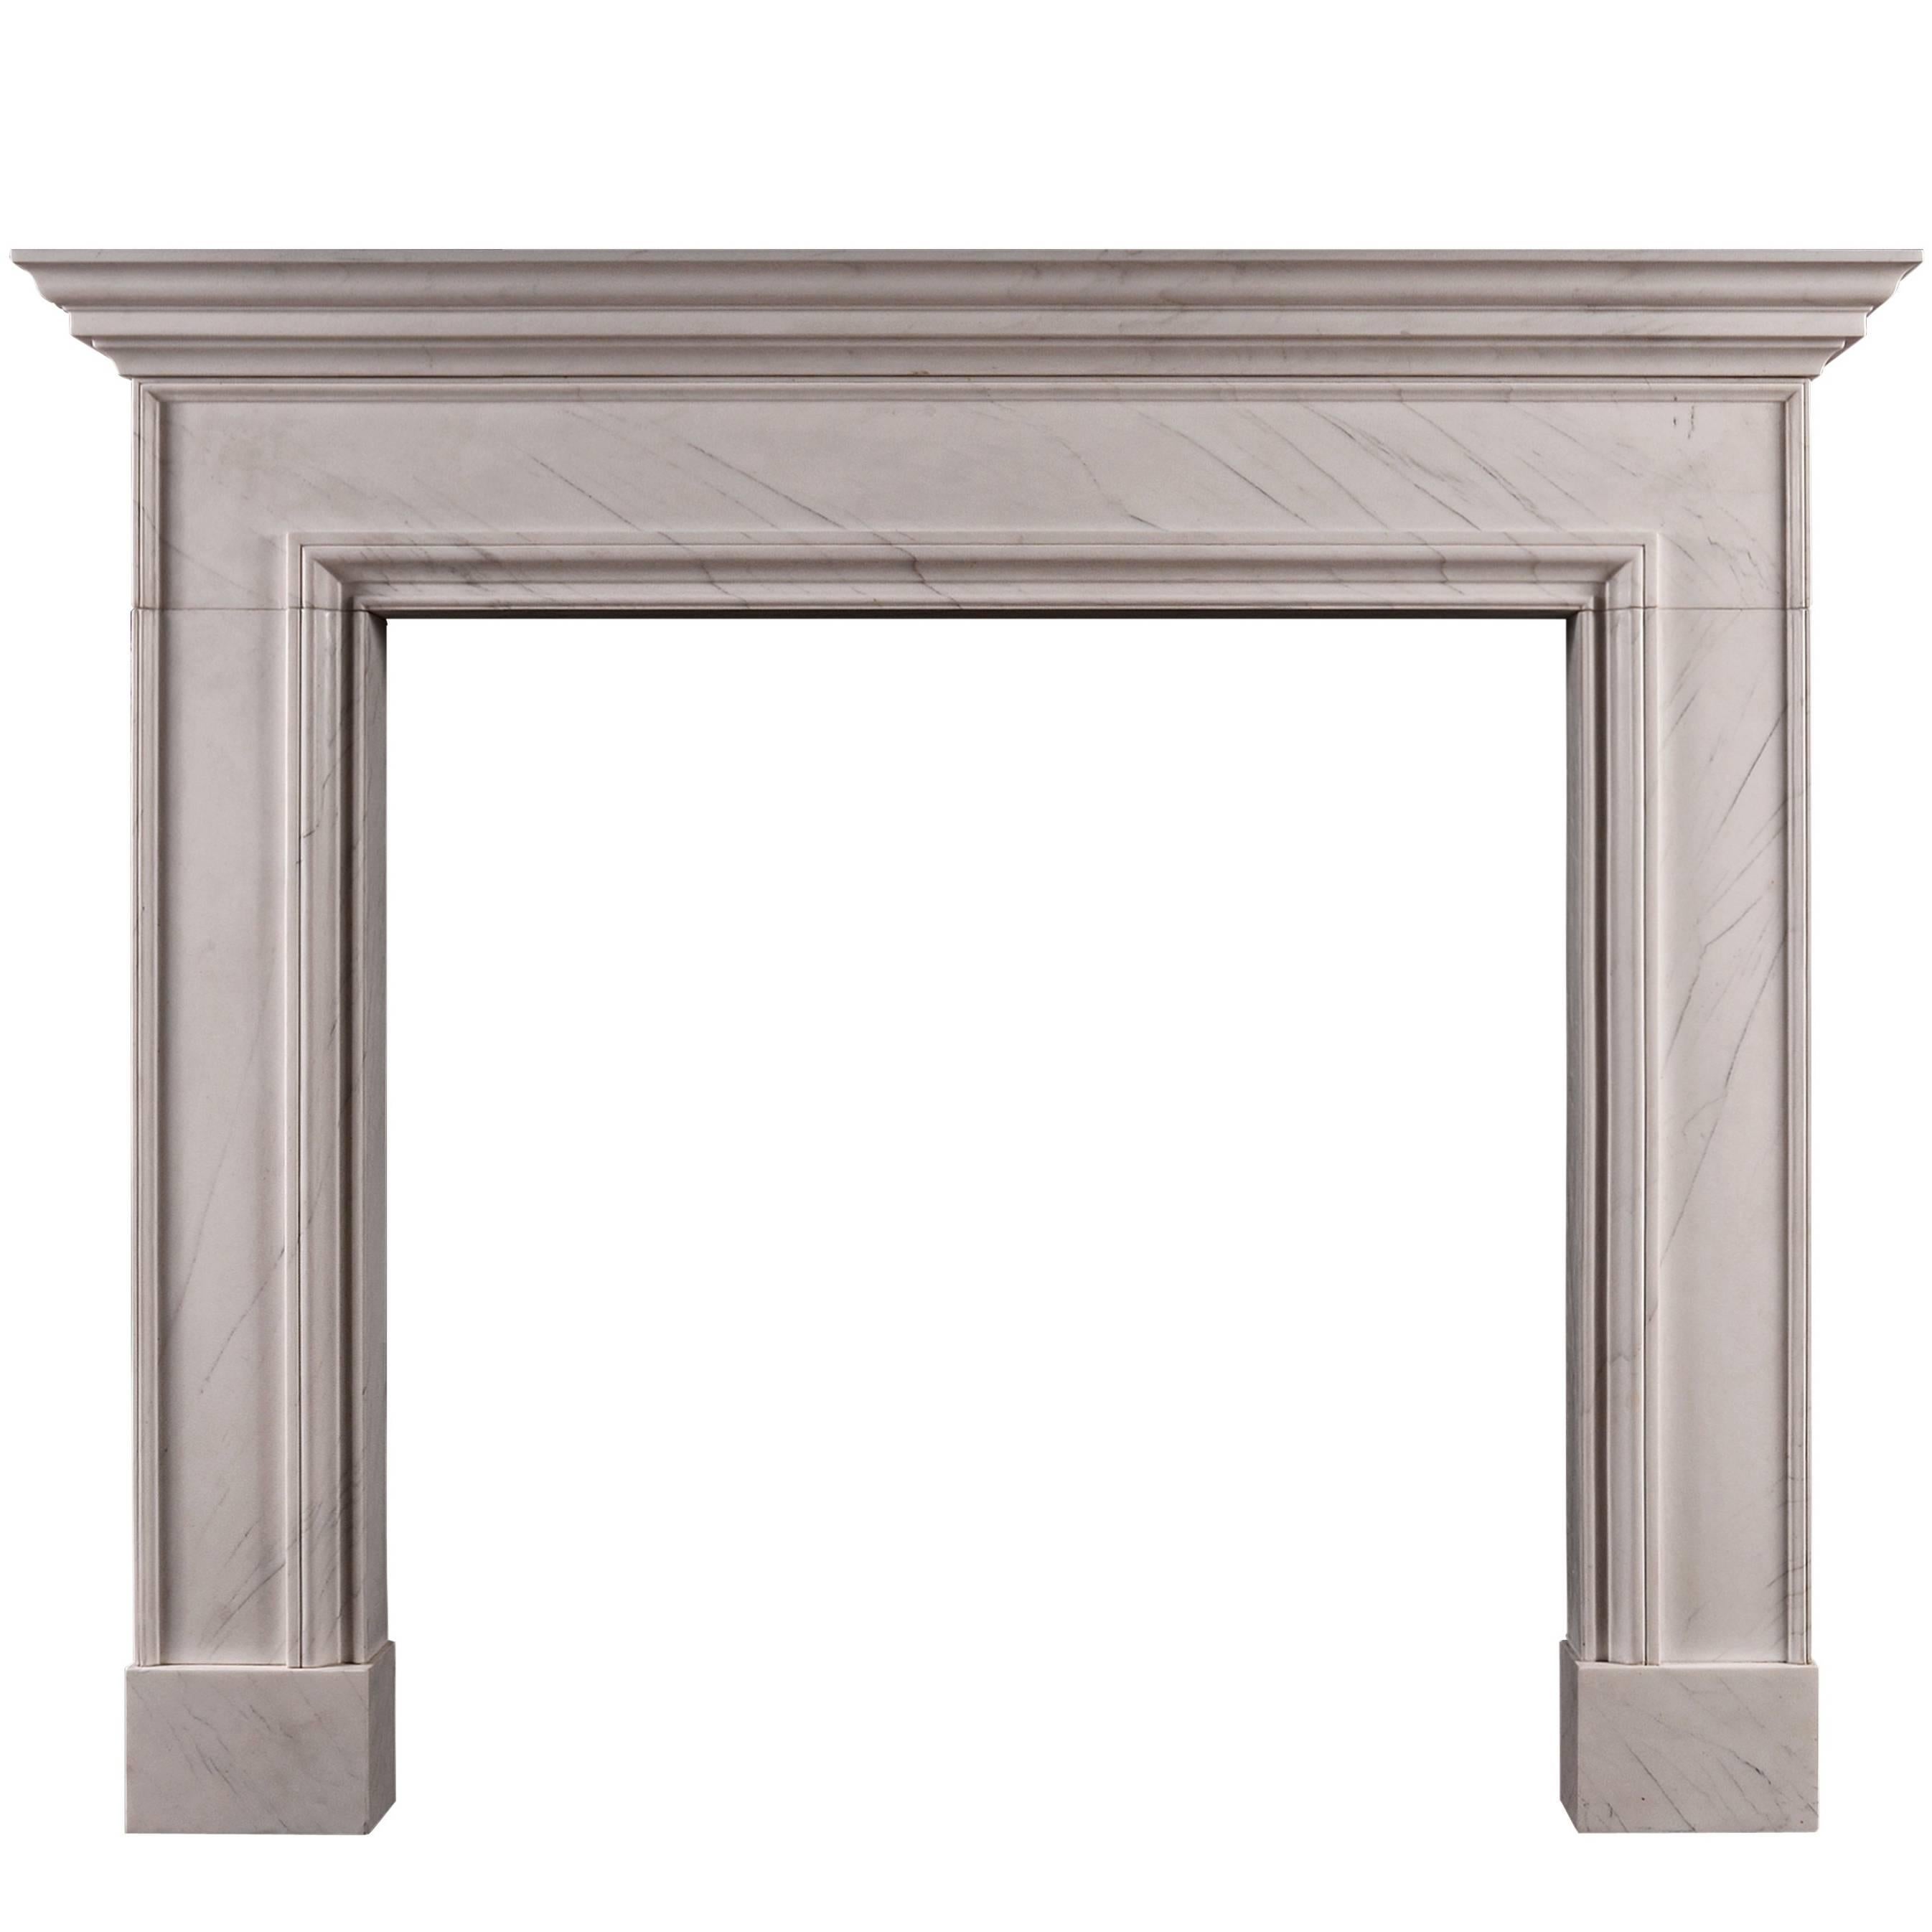 English Fireplace in White Marble